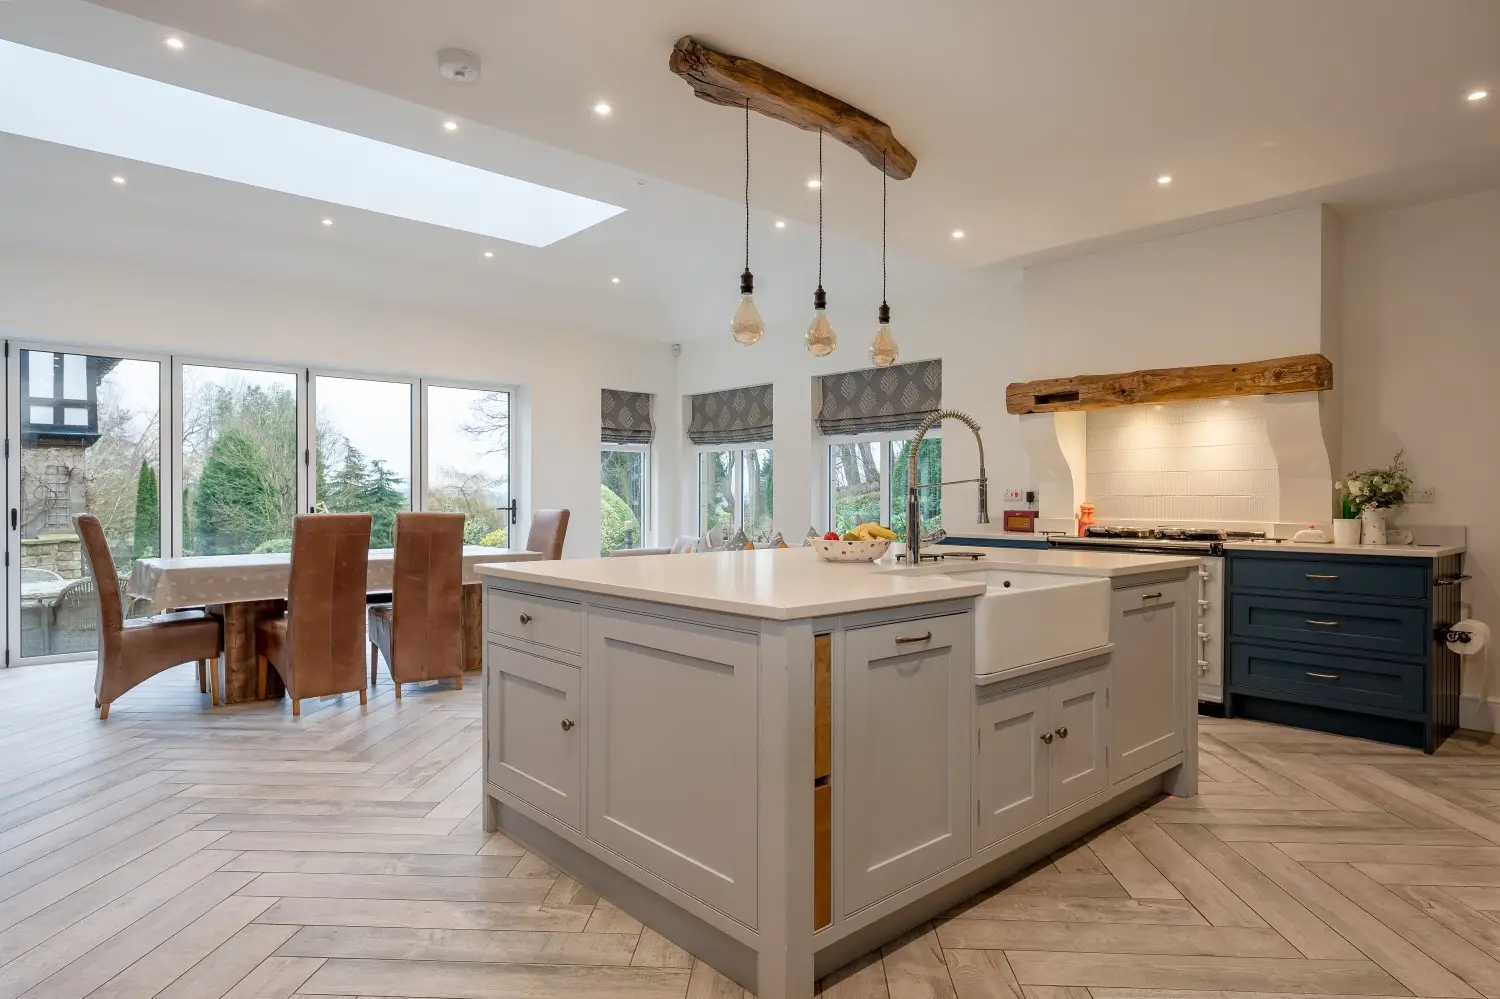 Listed property kitchen renovation in Pool, Yorkshire